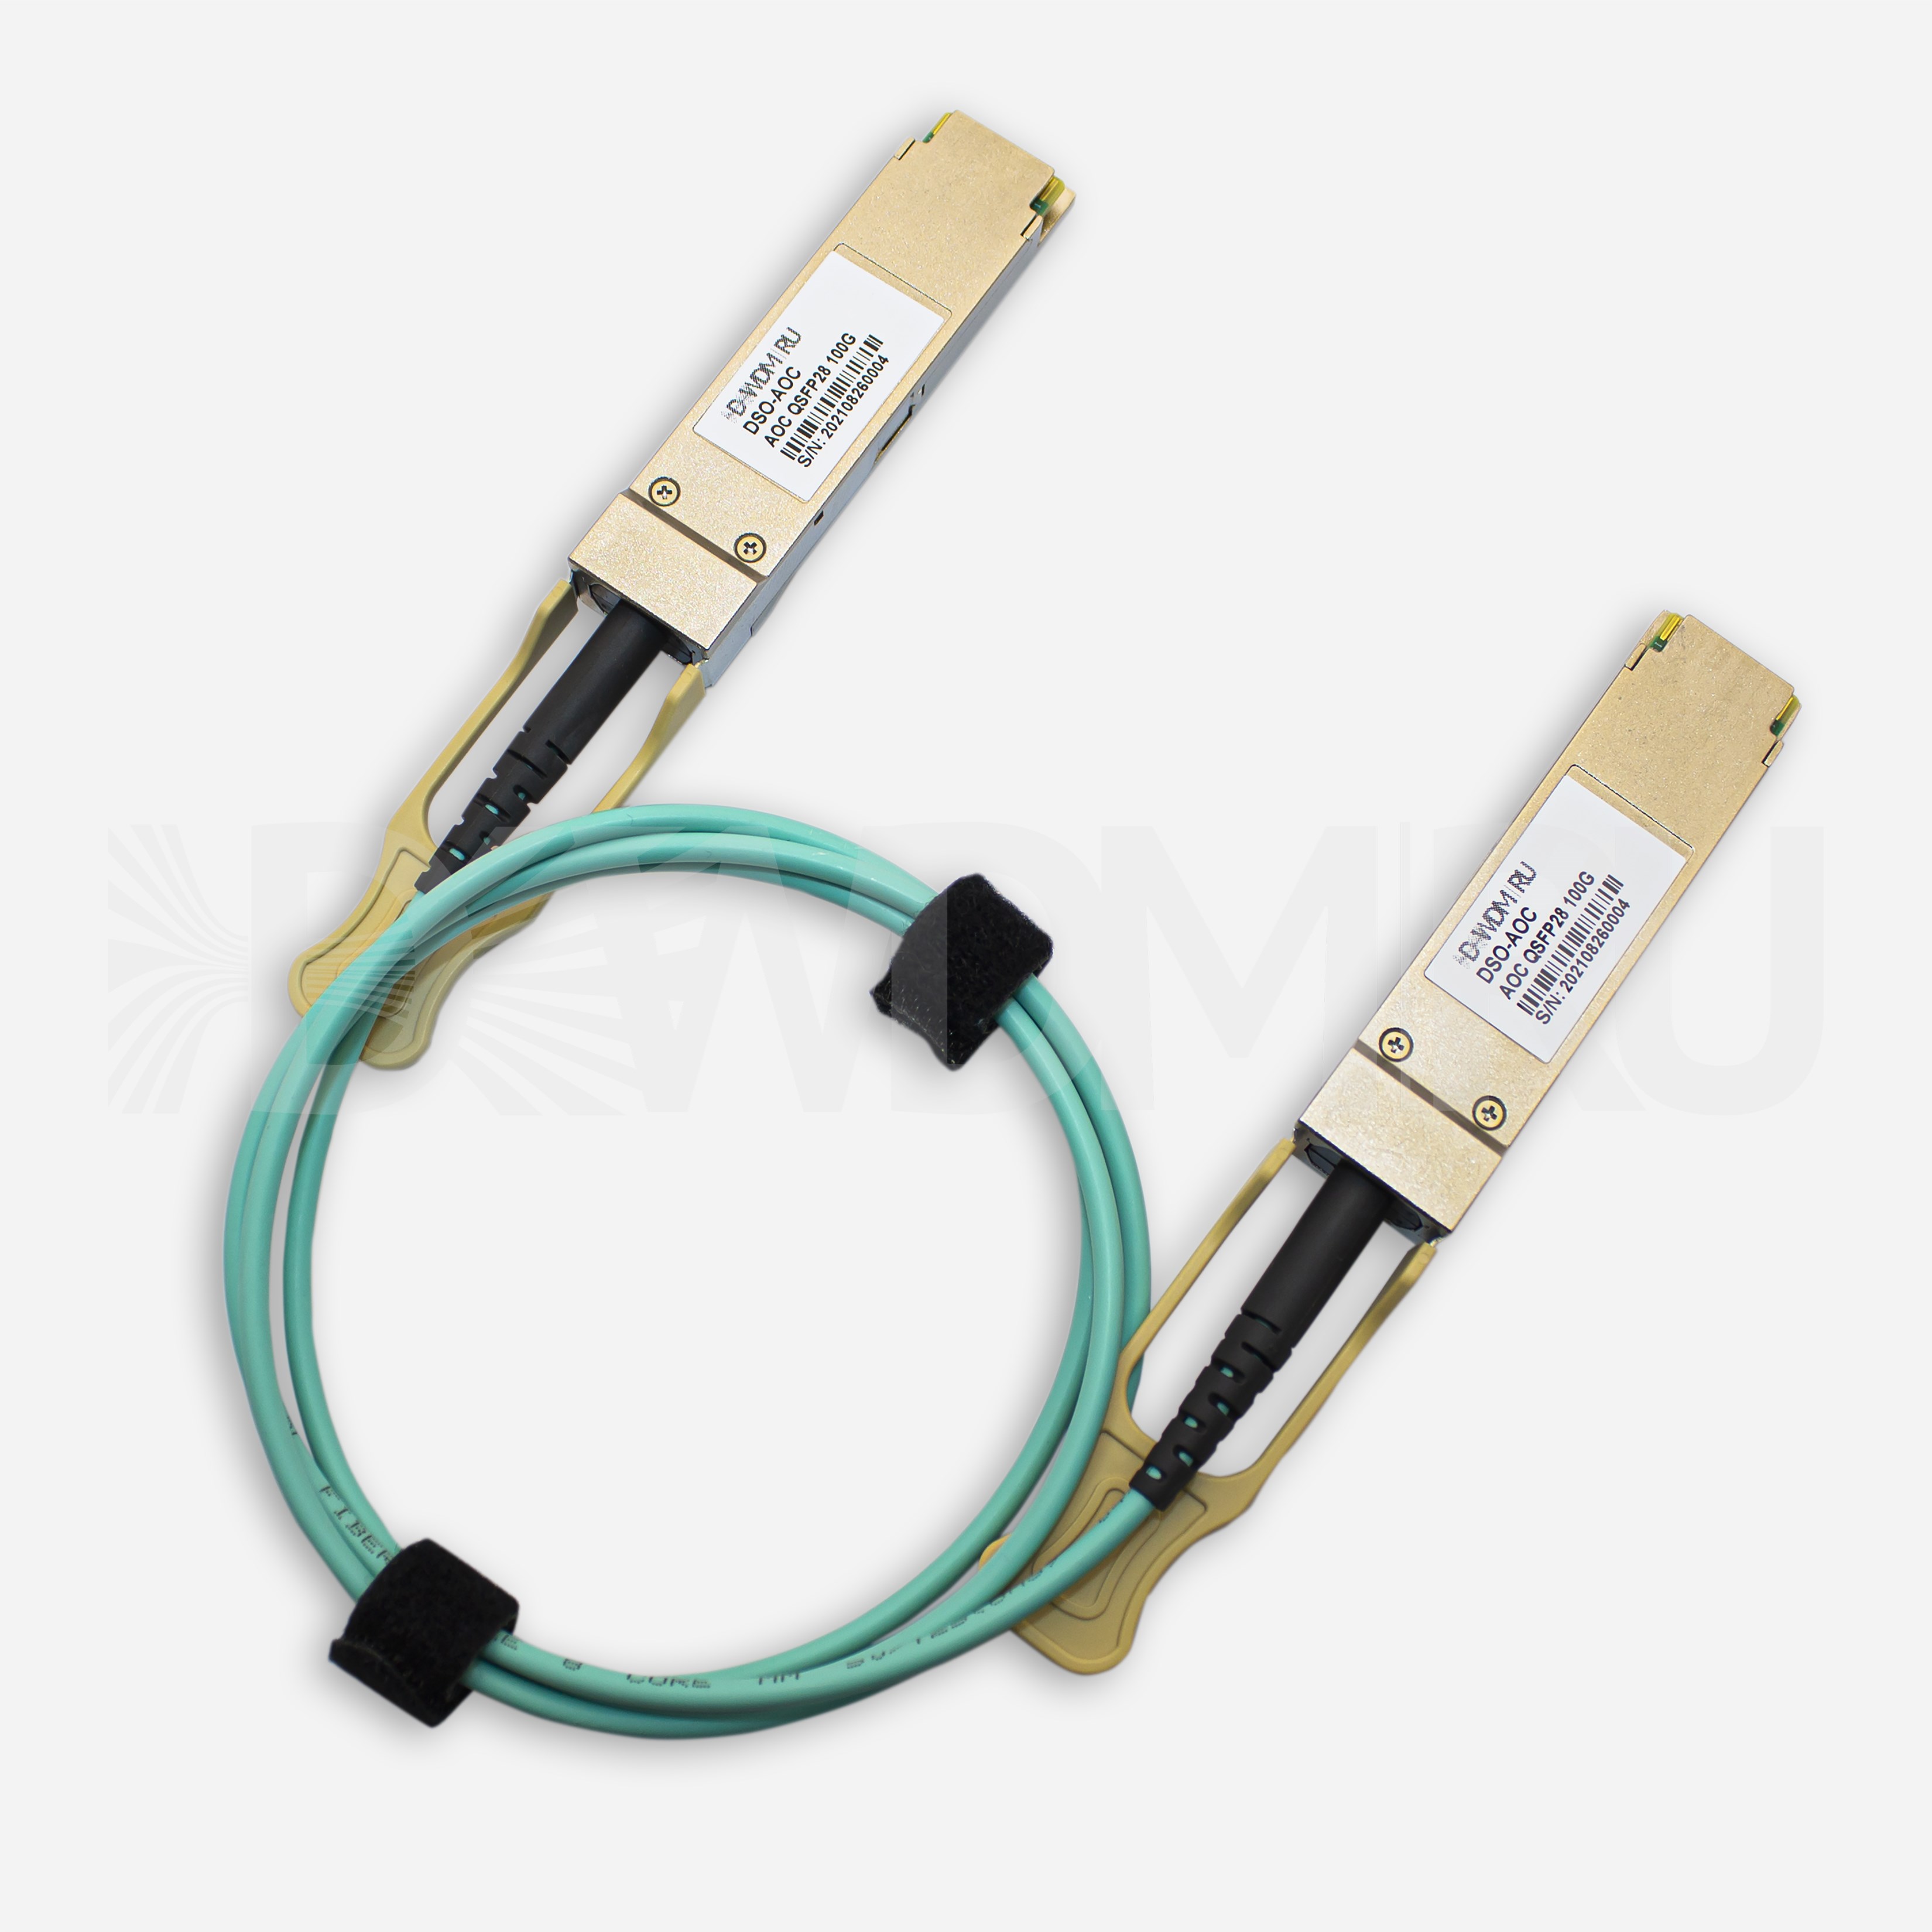 Active Optical Cable, QSFP28, 100 Гб/с, 1 м- ДВДМ.РУ (DSO-AOC-100-2)